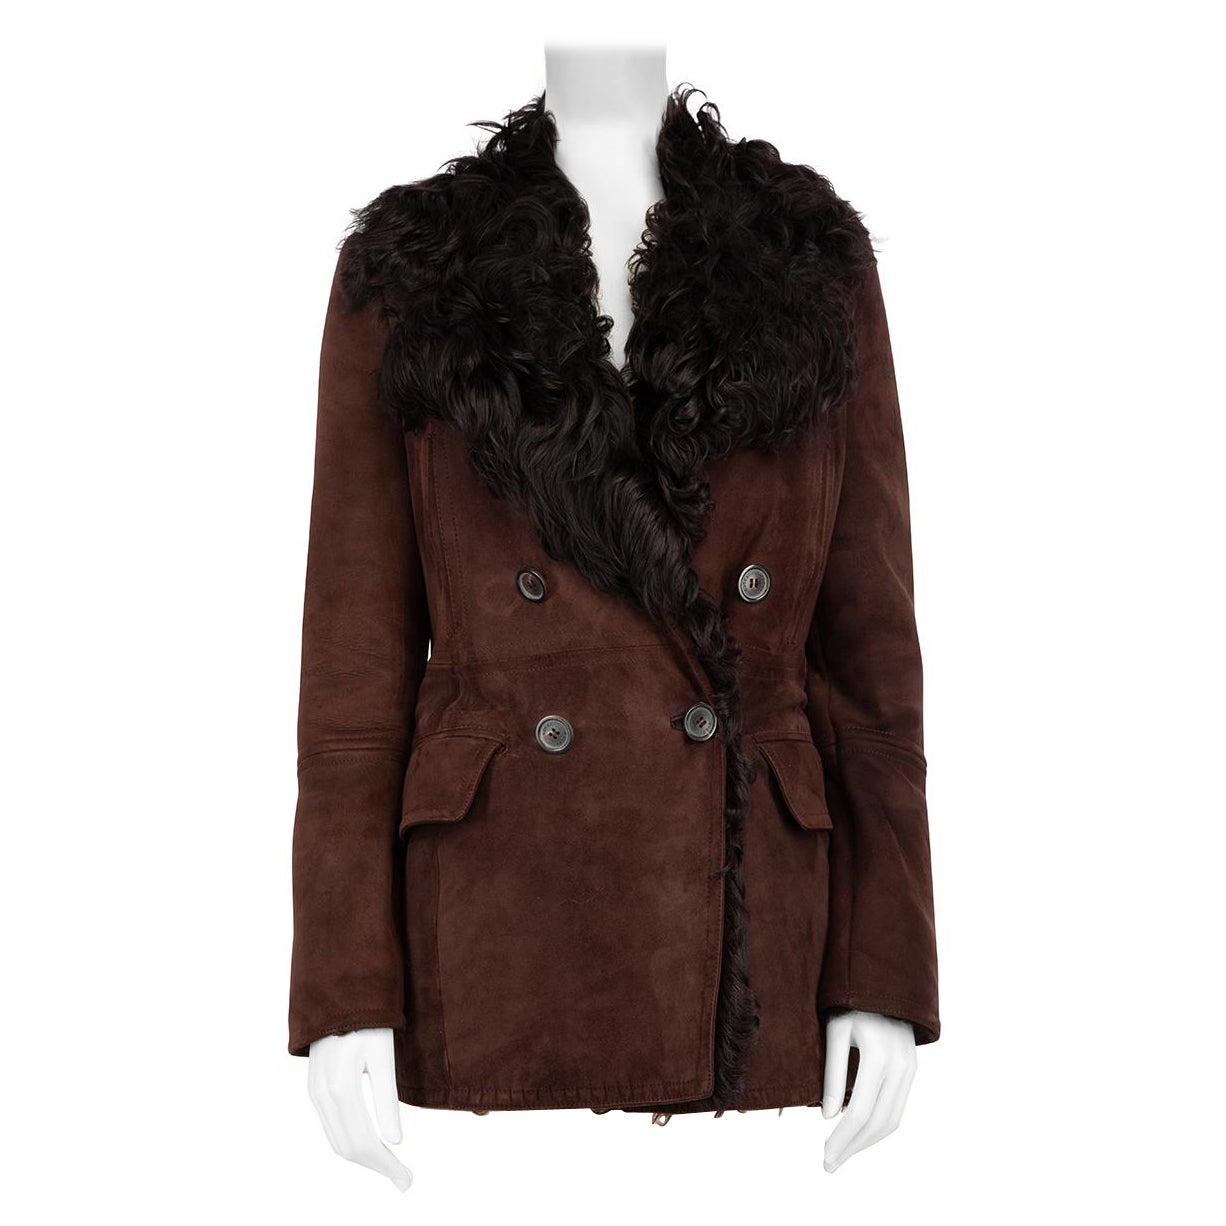 Gucci Brown Shearling Suede Oversized Jacket Size M